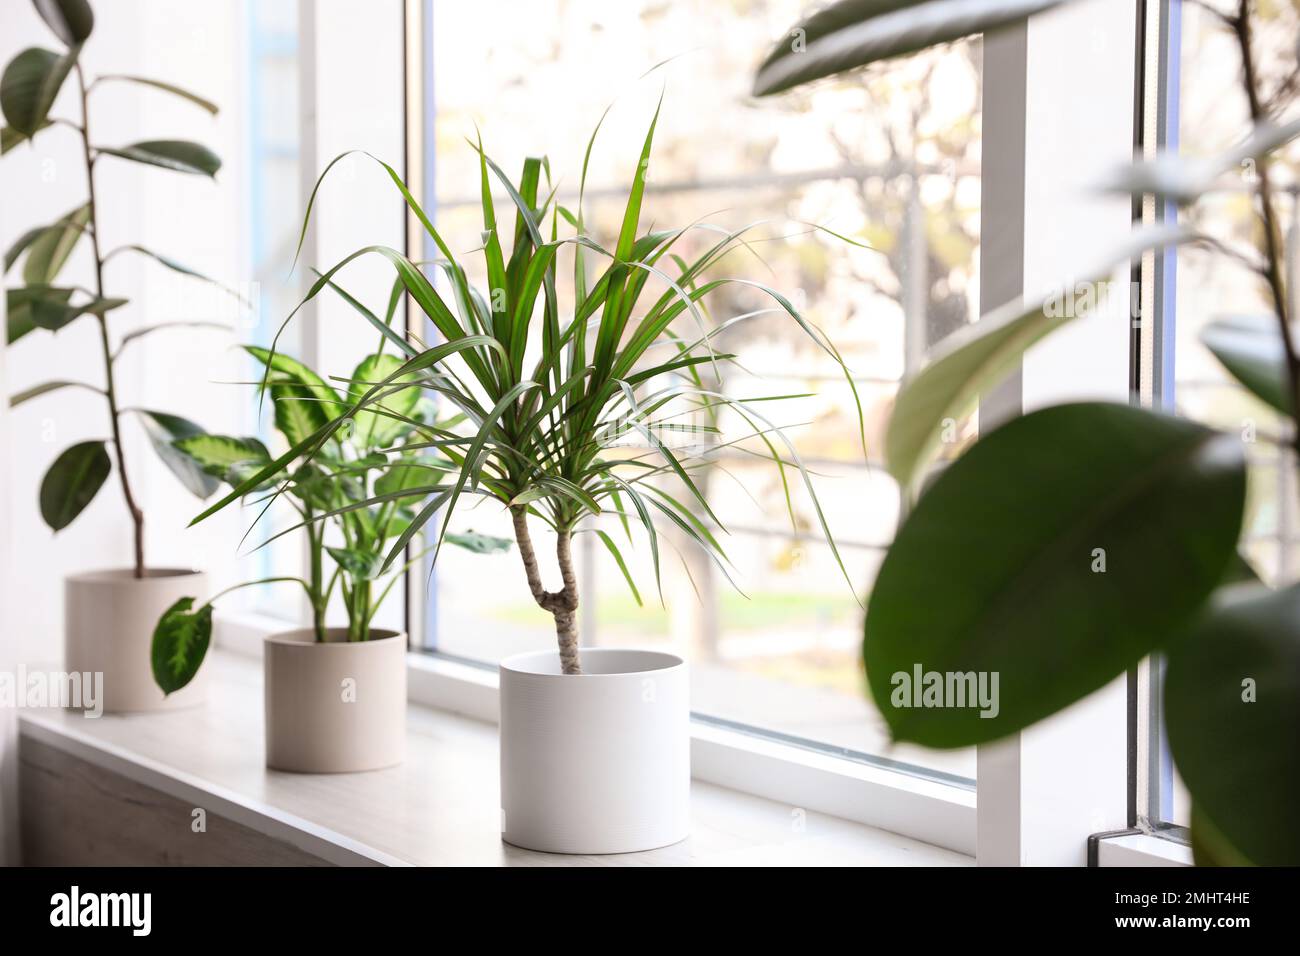 Different potted plants near window at home Stock Photo